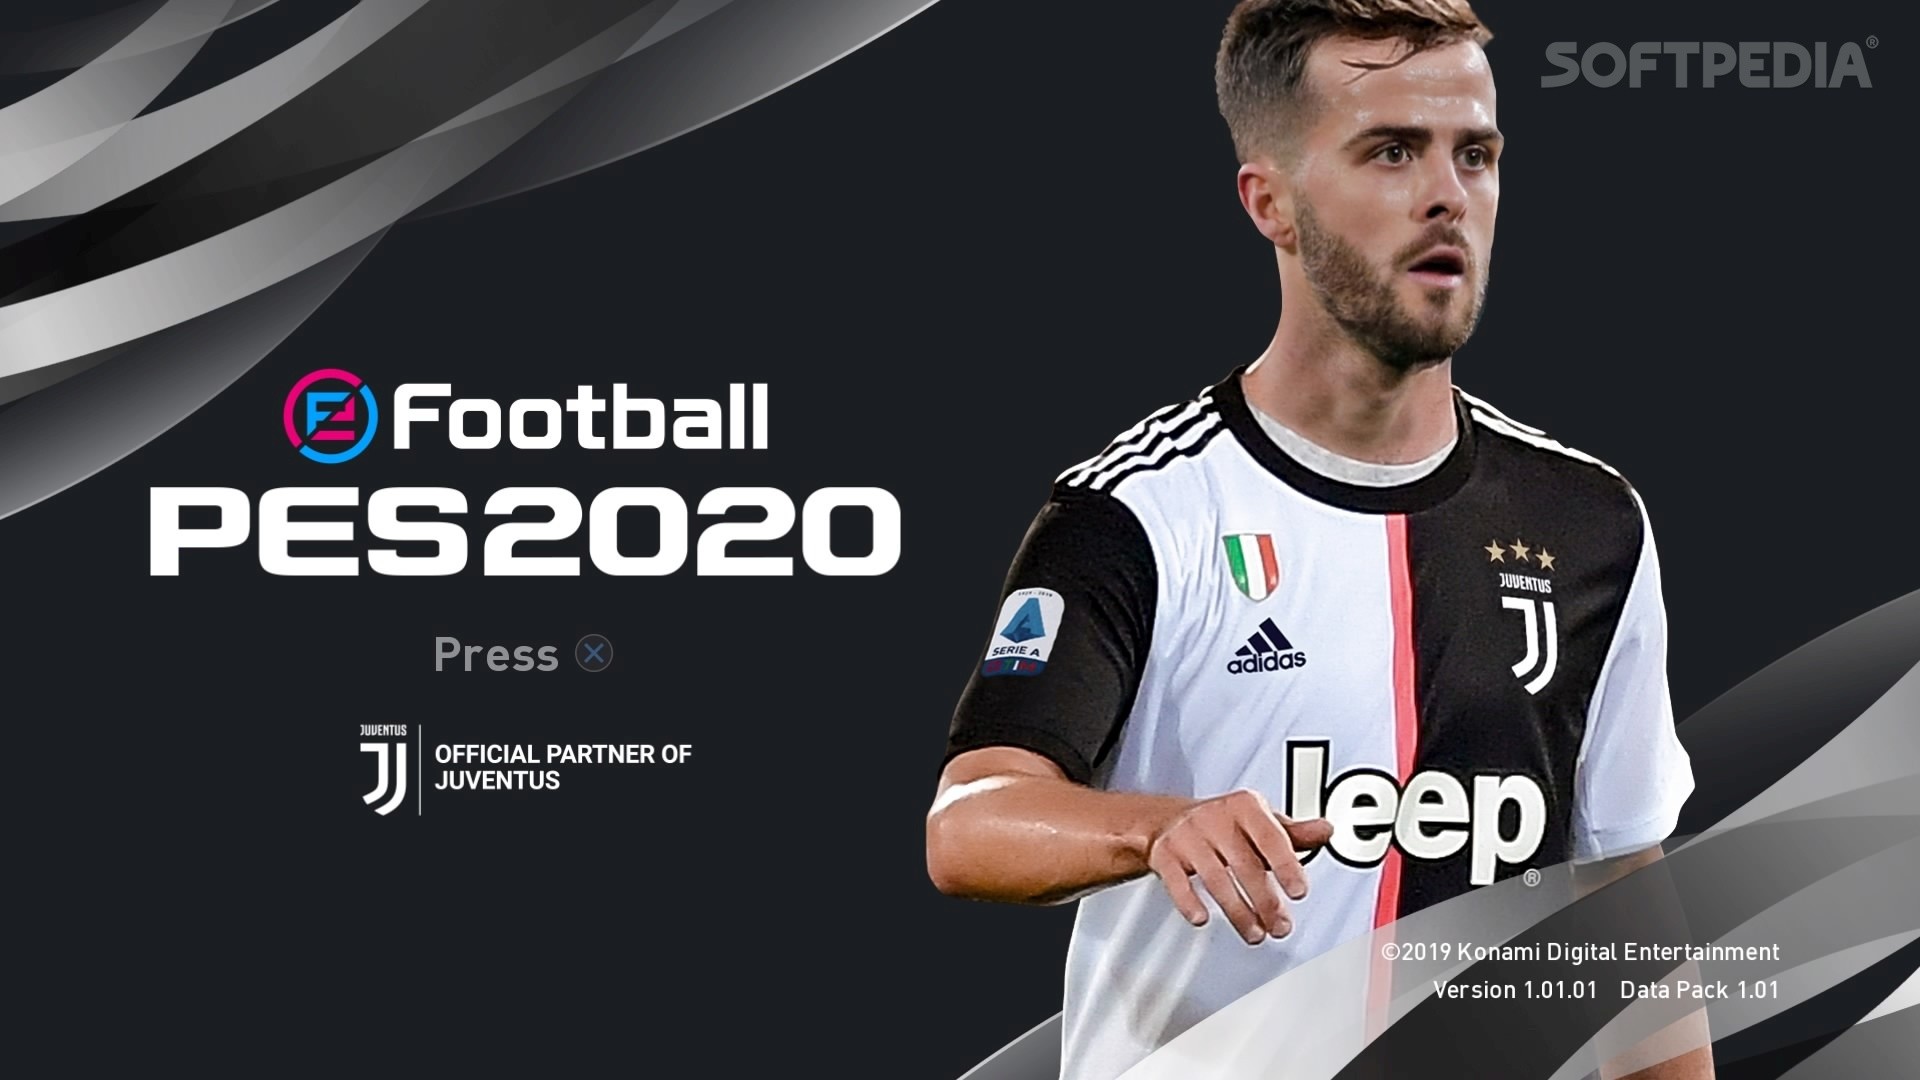 efootball pes 2020 lite system requirements